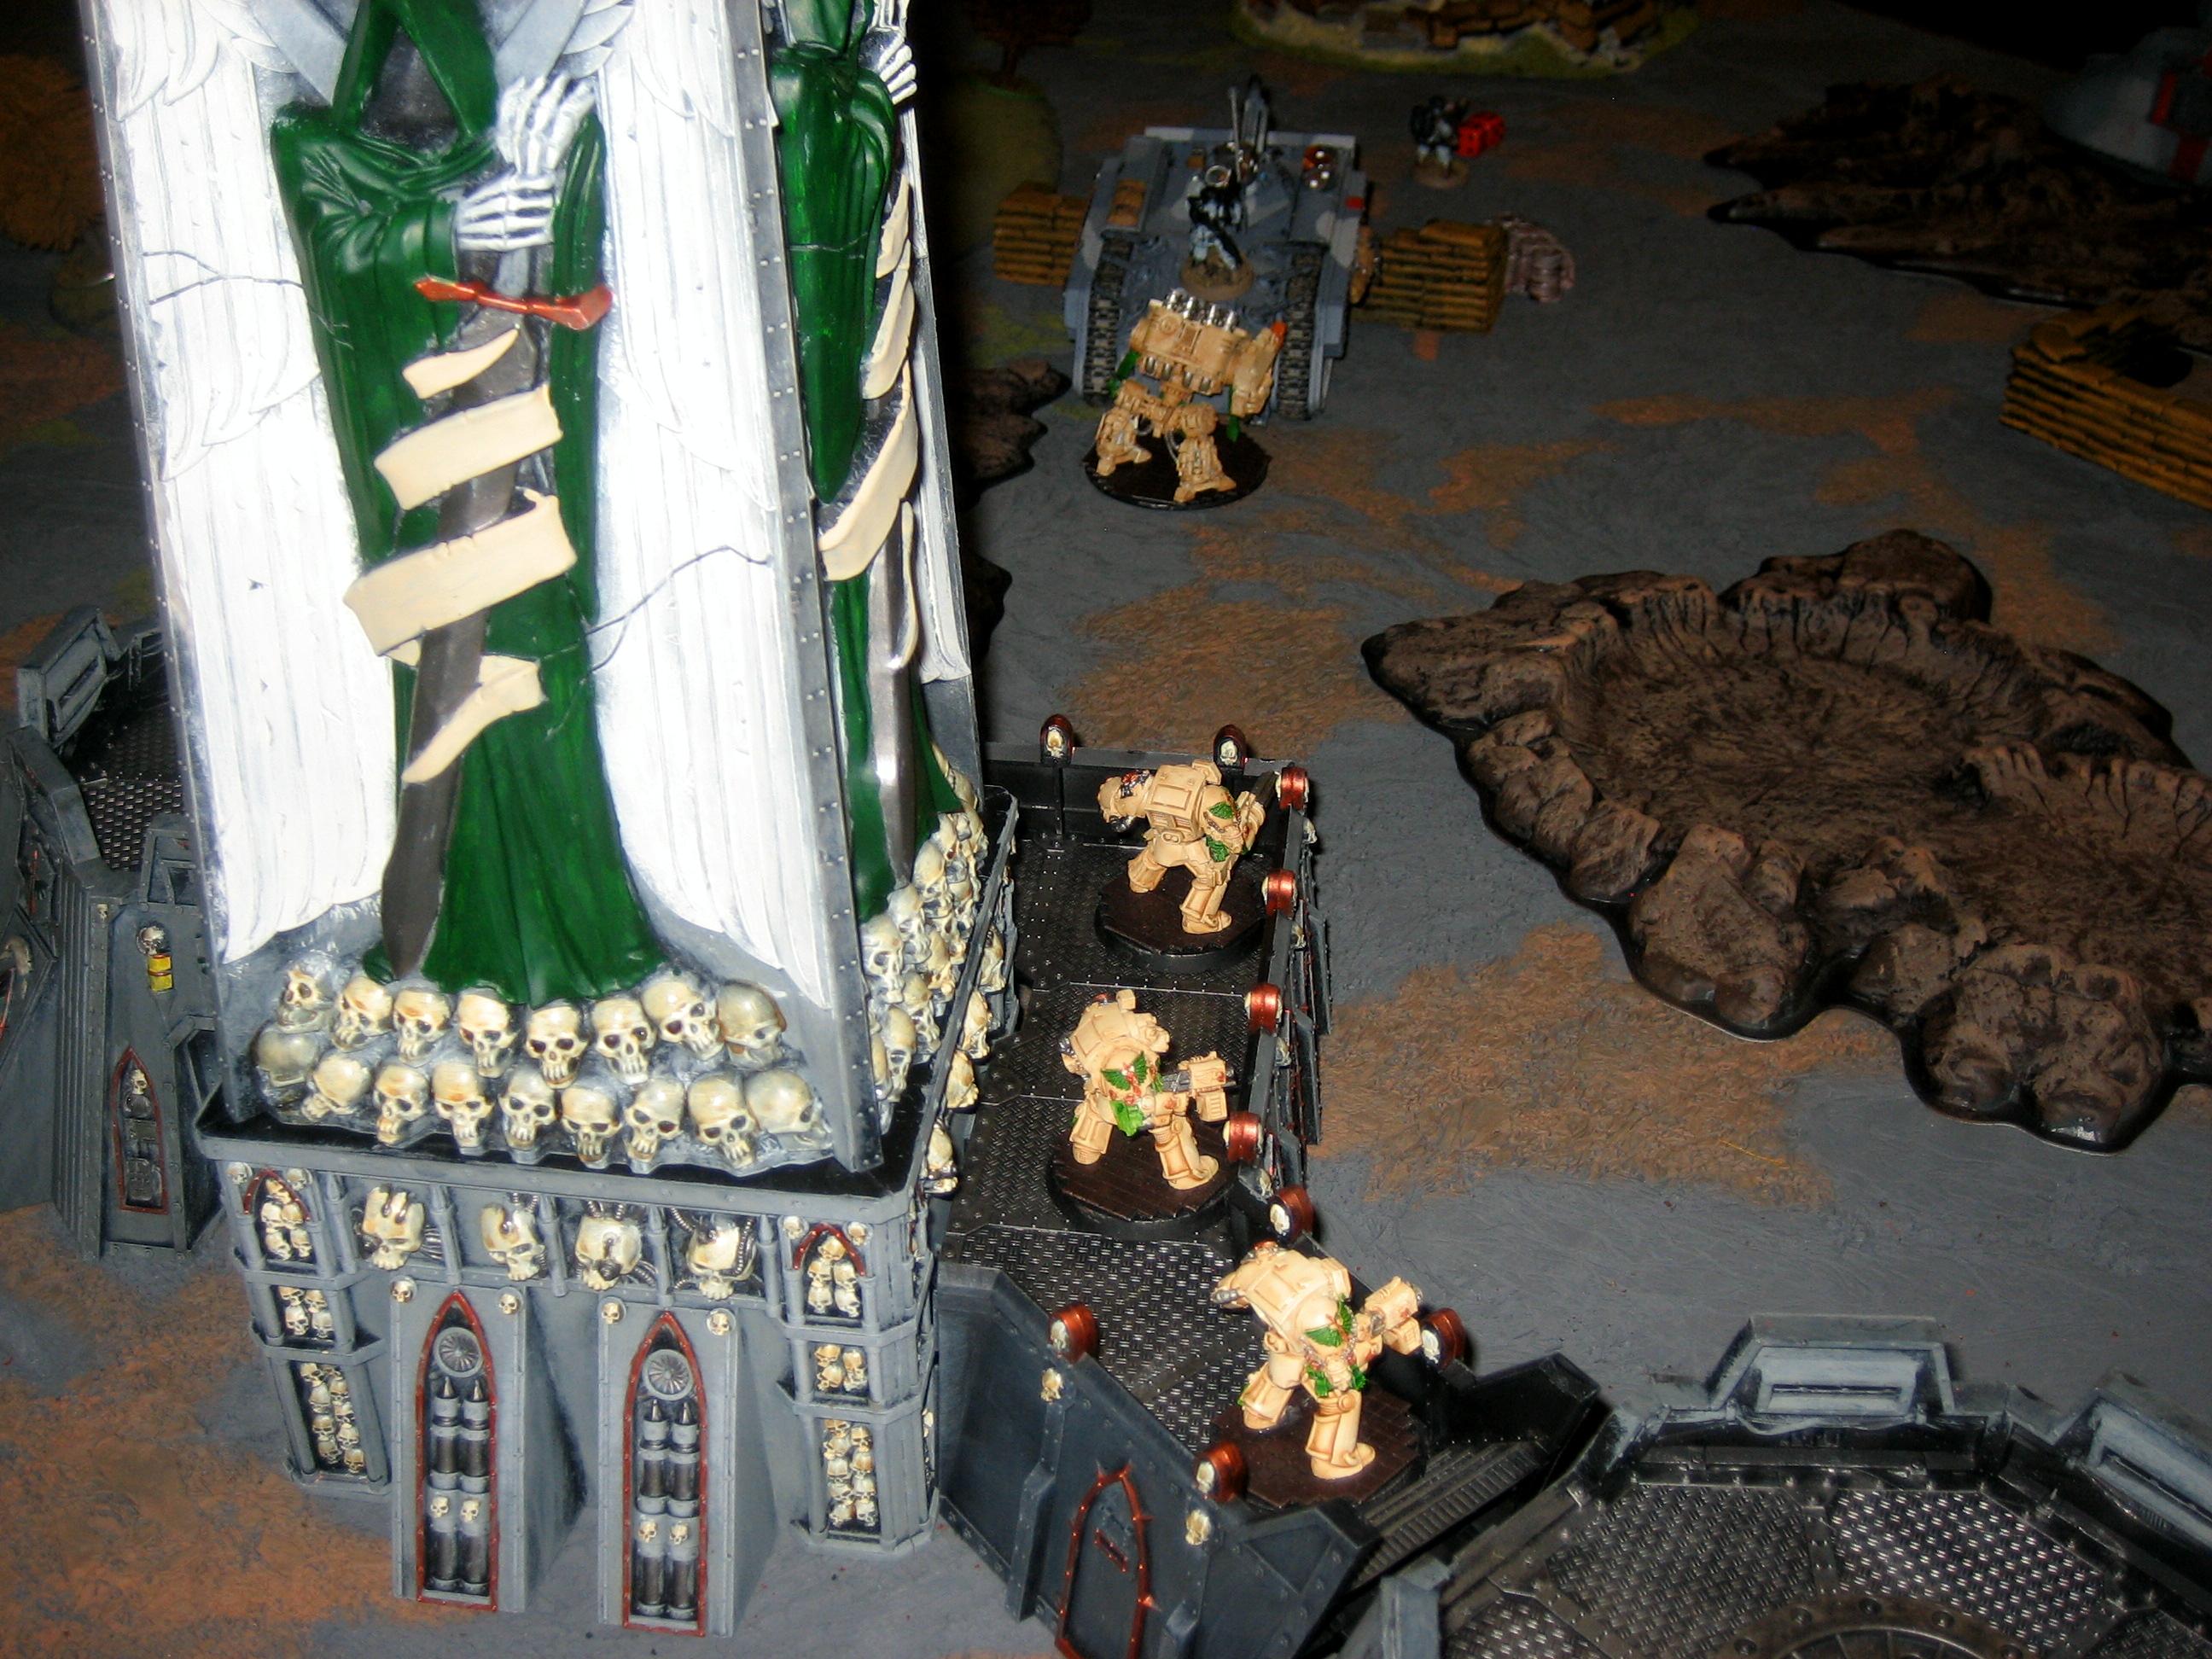 Battle Report, Deathwing, Fortress Of Redemption, Imperial Guard